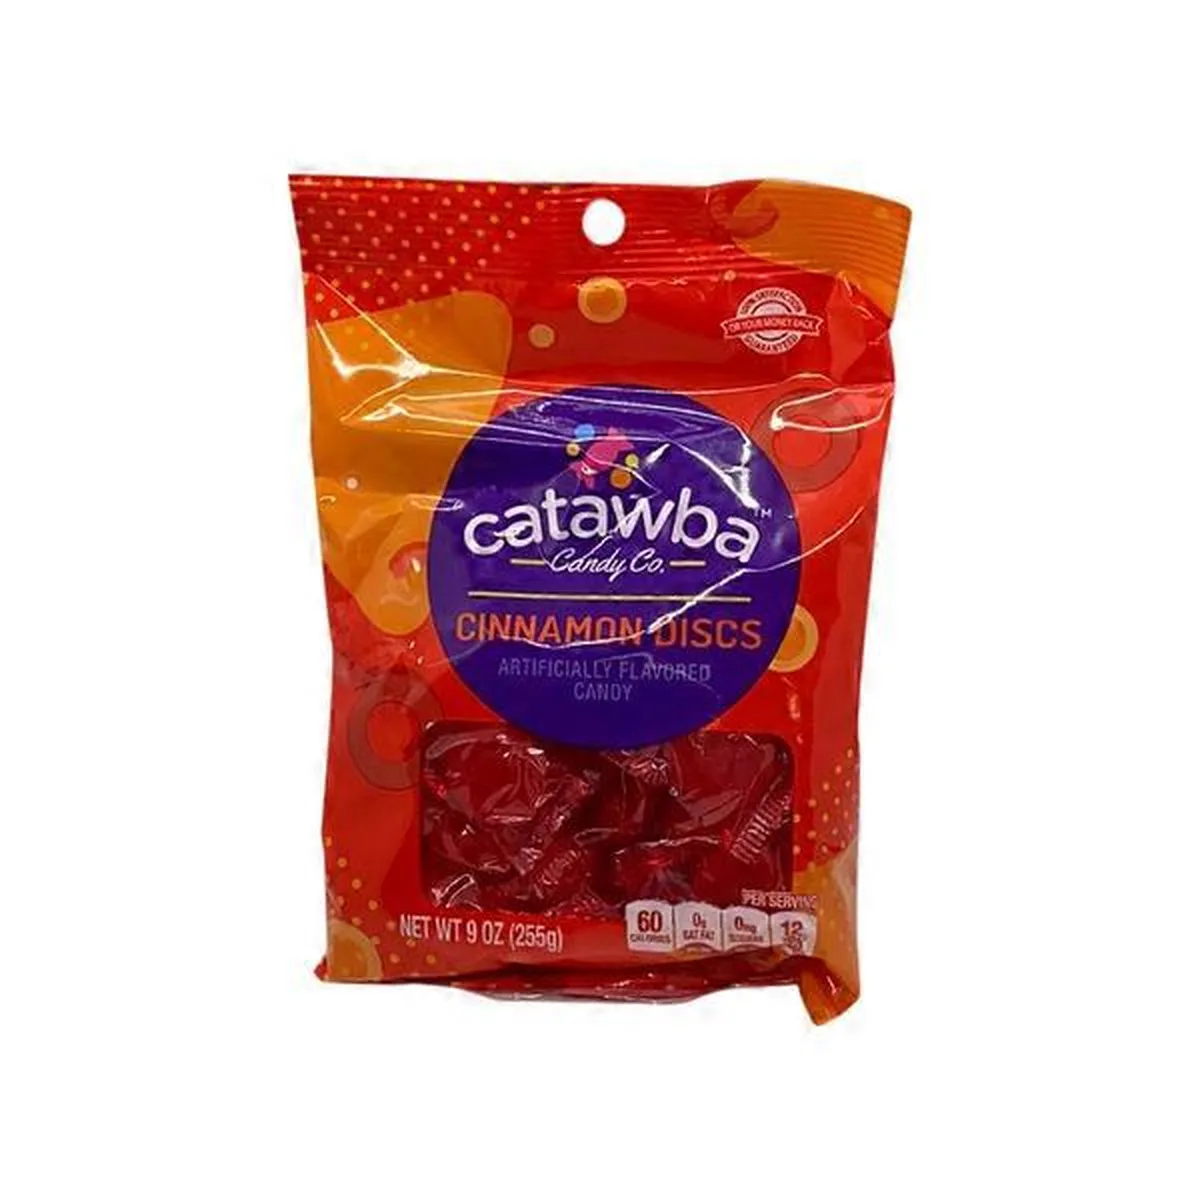 Catawba Candy Co. Cinnamon Discs Candy (9 oz) Delivery or Pickup Near Me -  Instacart